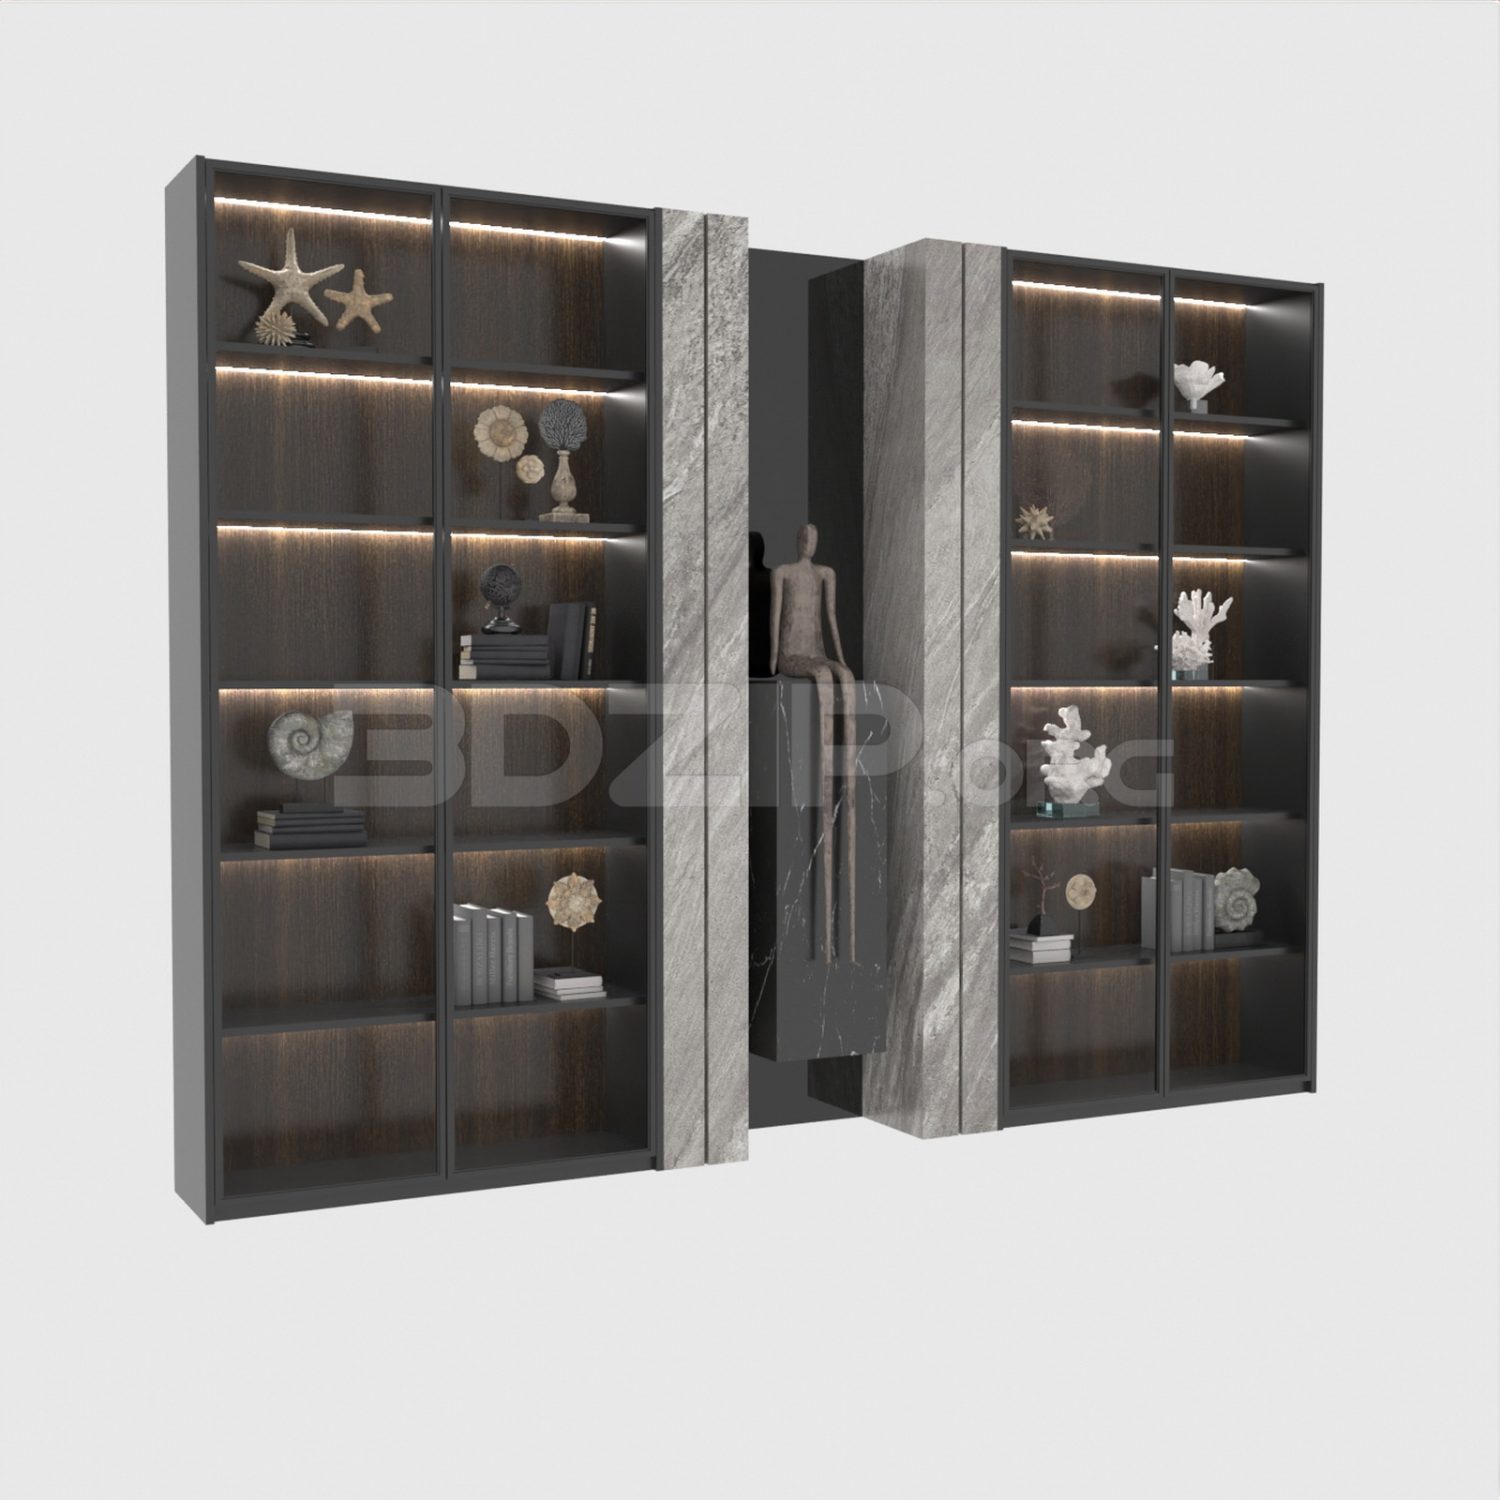 10599. Download Free Display Cabinets Model By Nguyen Ngoc Tung